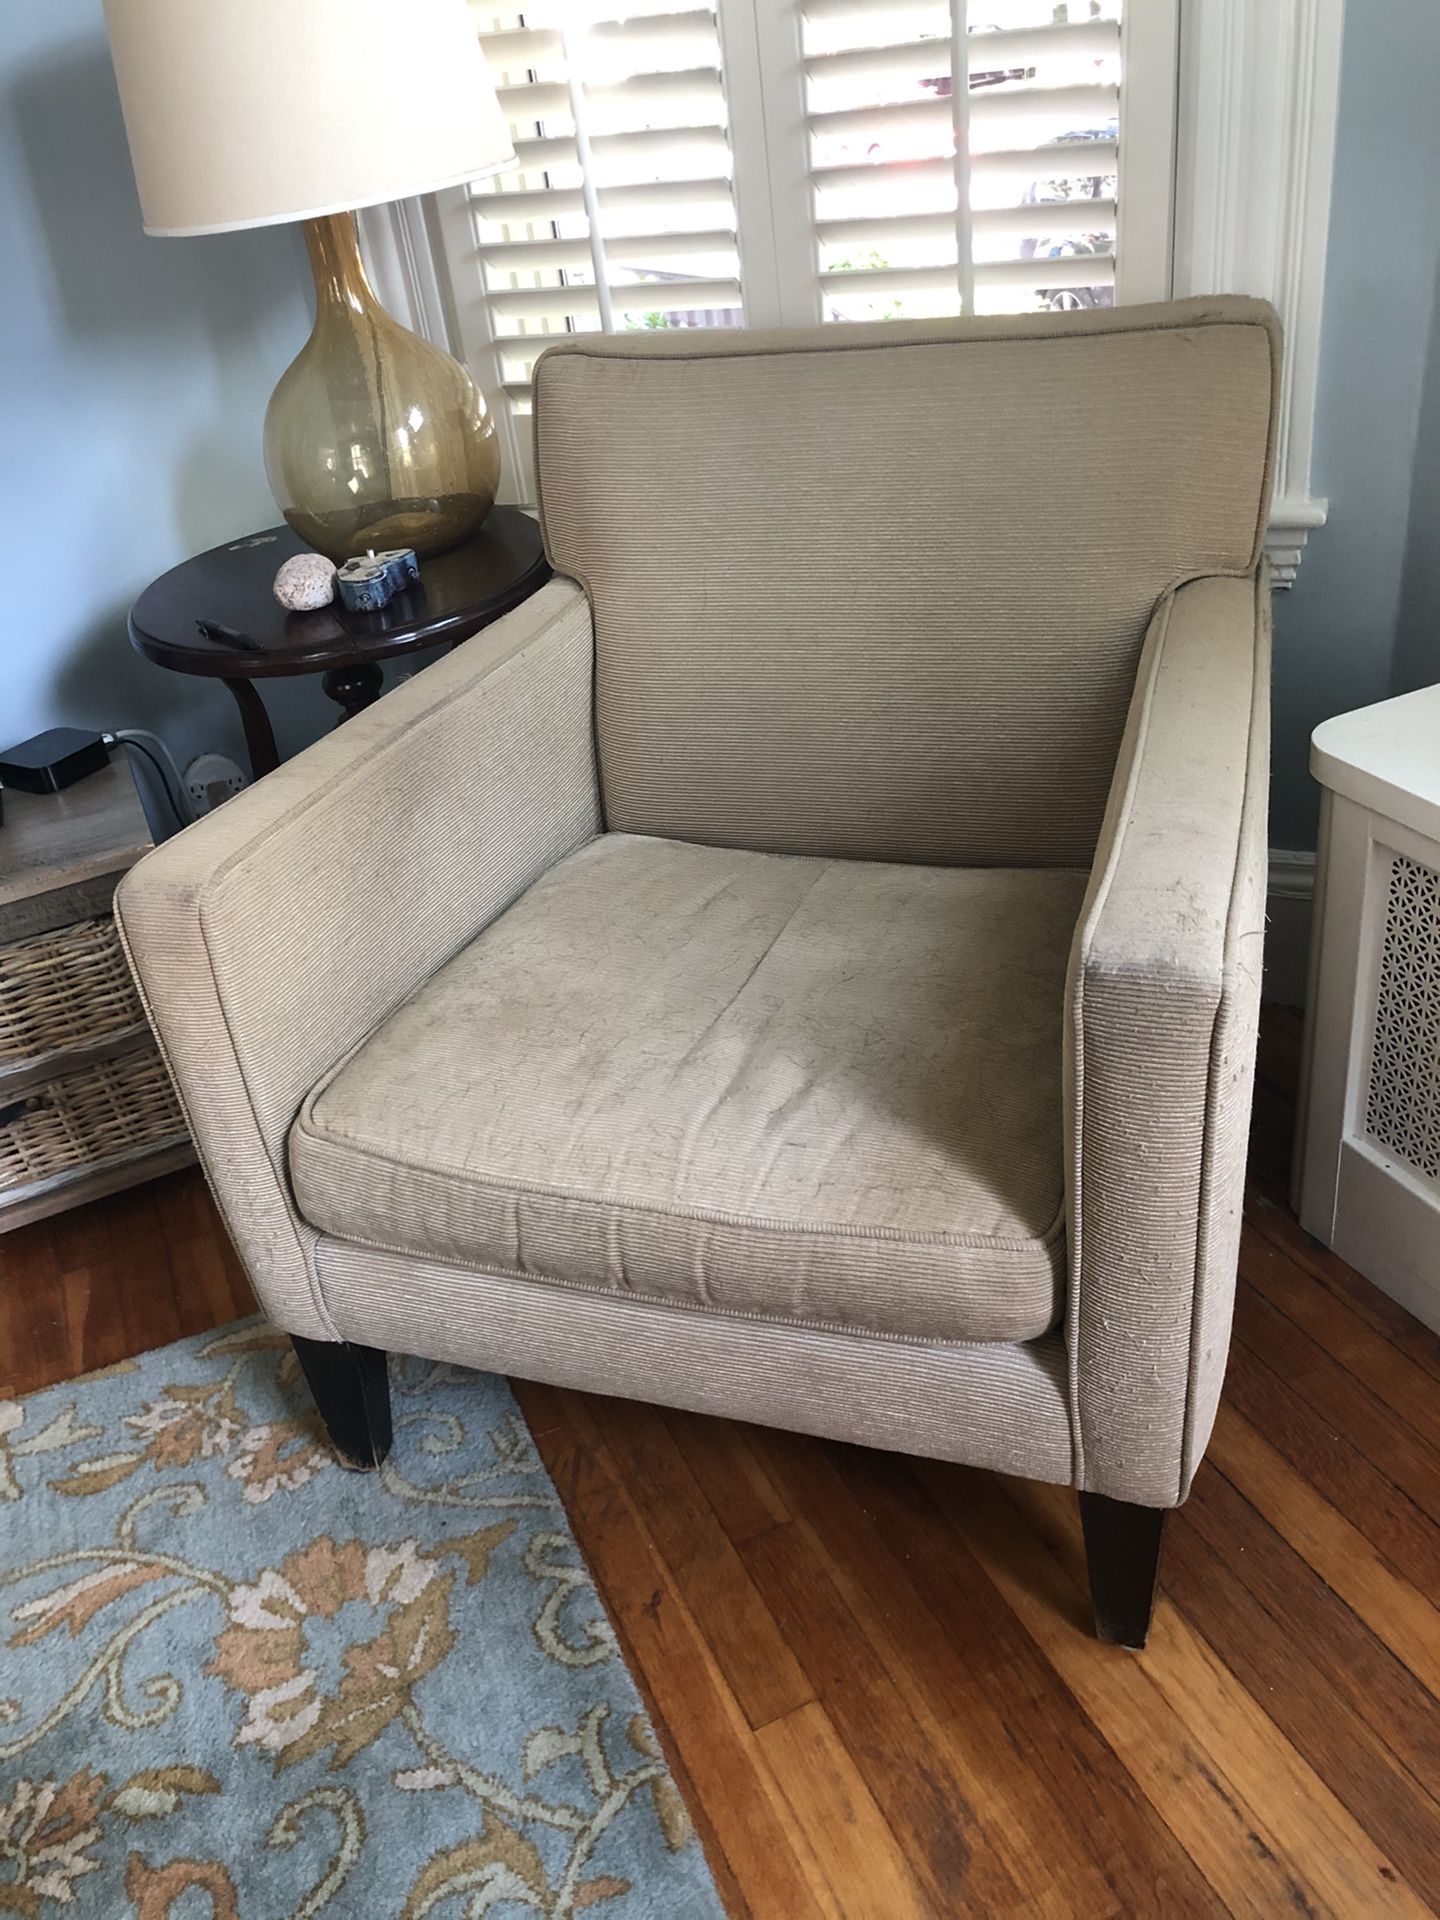 Free armchair set (2 chairs) on meacham road